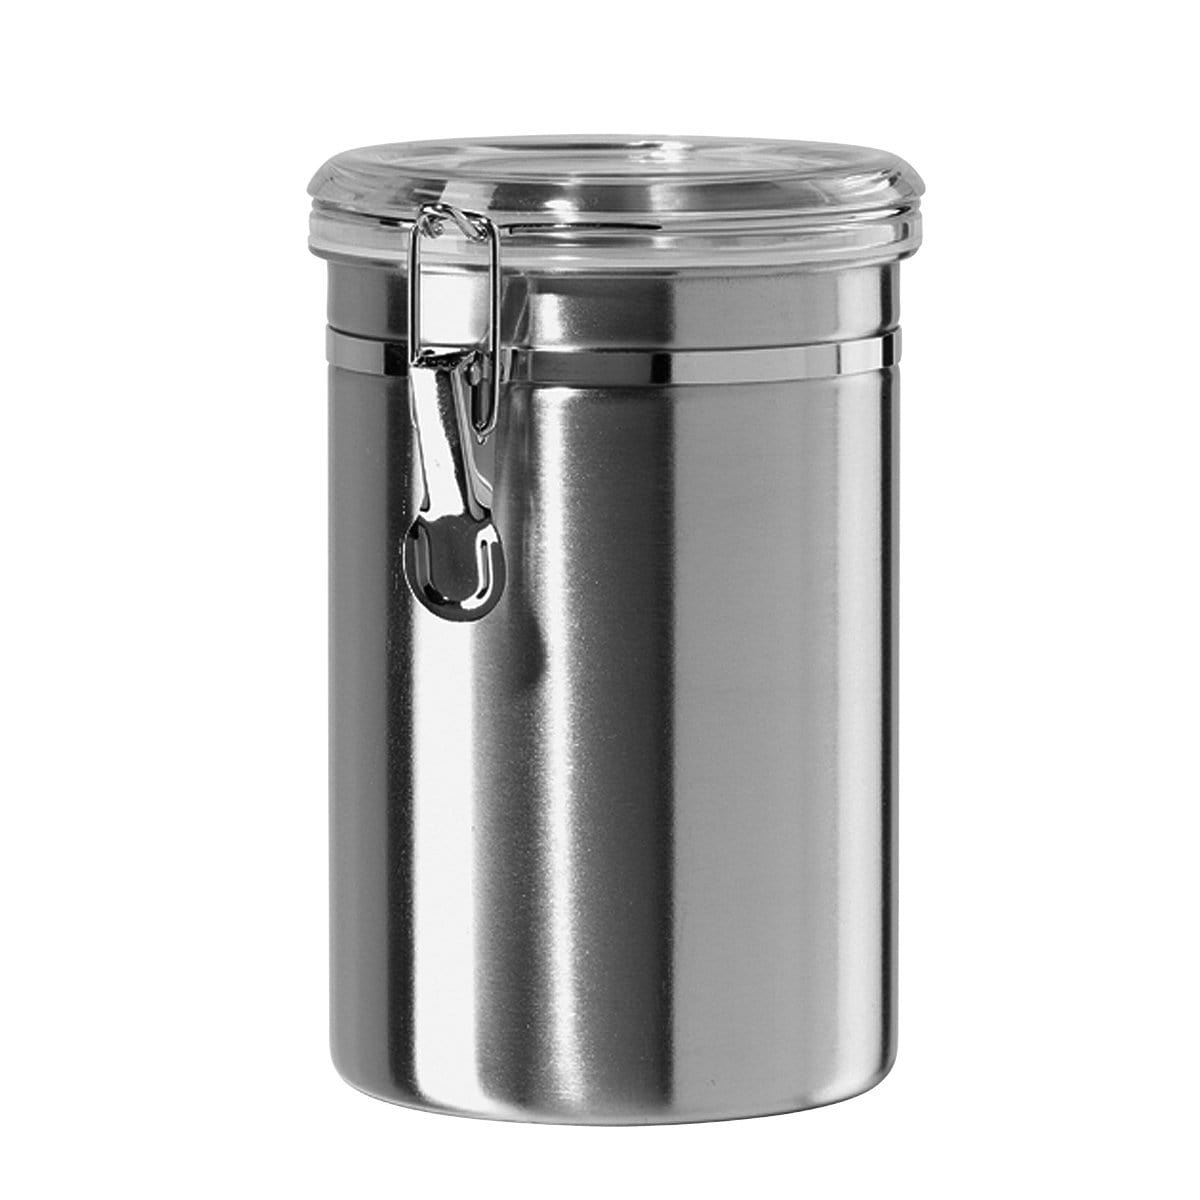 OGGI Large Stainless Steel Kitchen Airtight Canister 60 oz